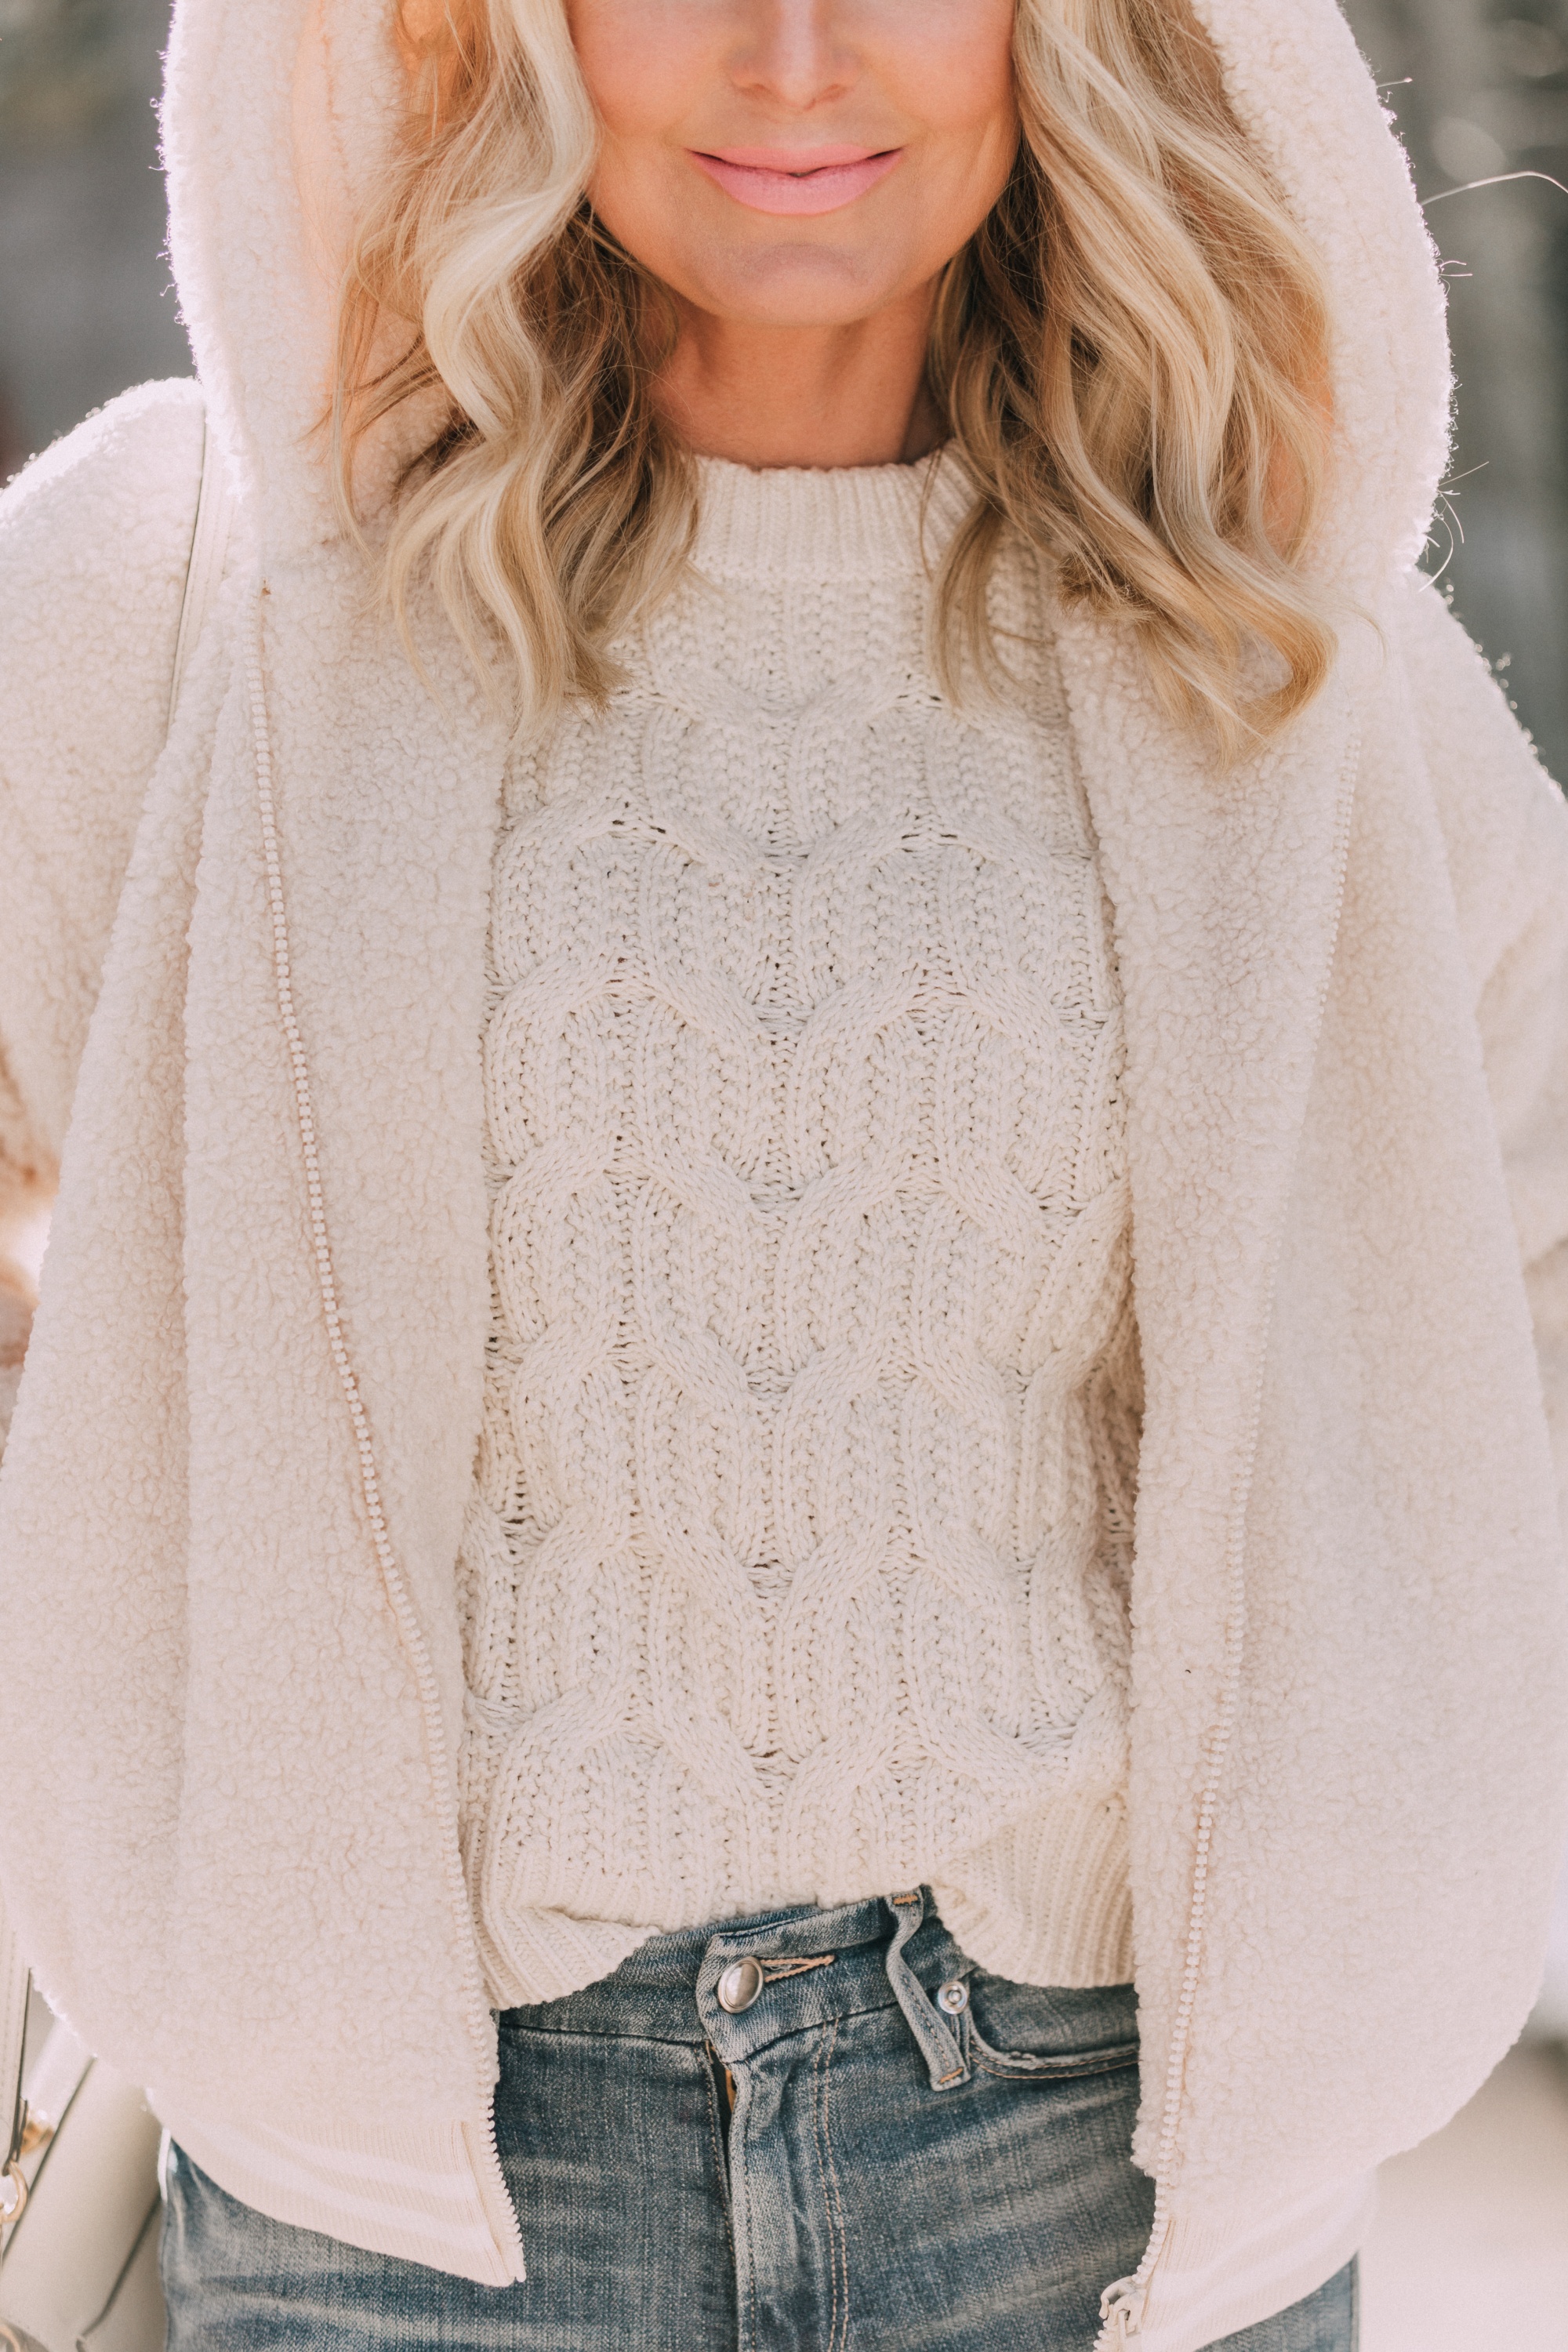 walmart fashion blogger wearing cozy faux fur teddy Scoop jacket, white Scoop cable knit sweater, medium wash skinny jeans